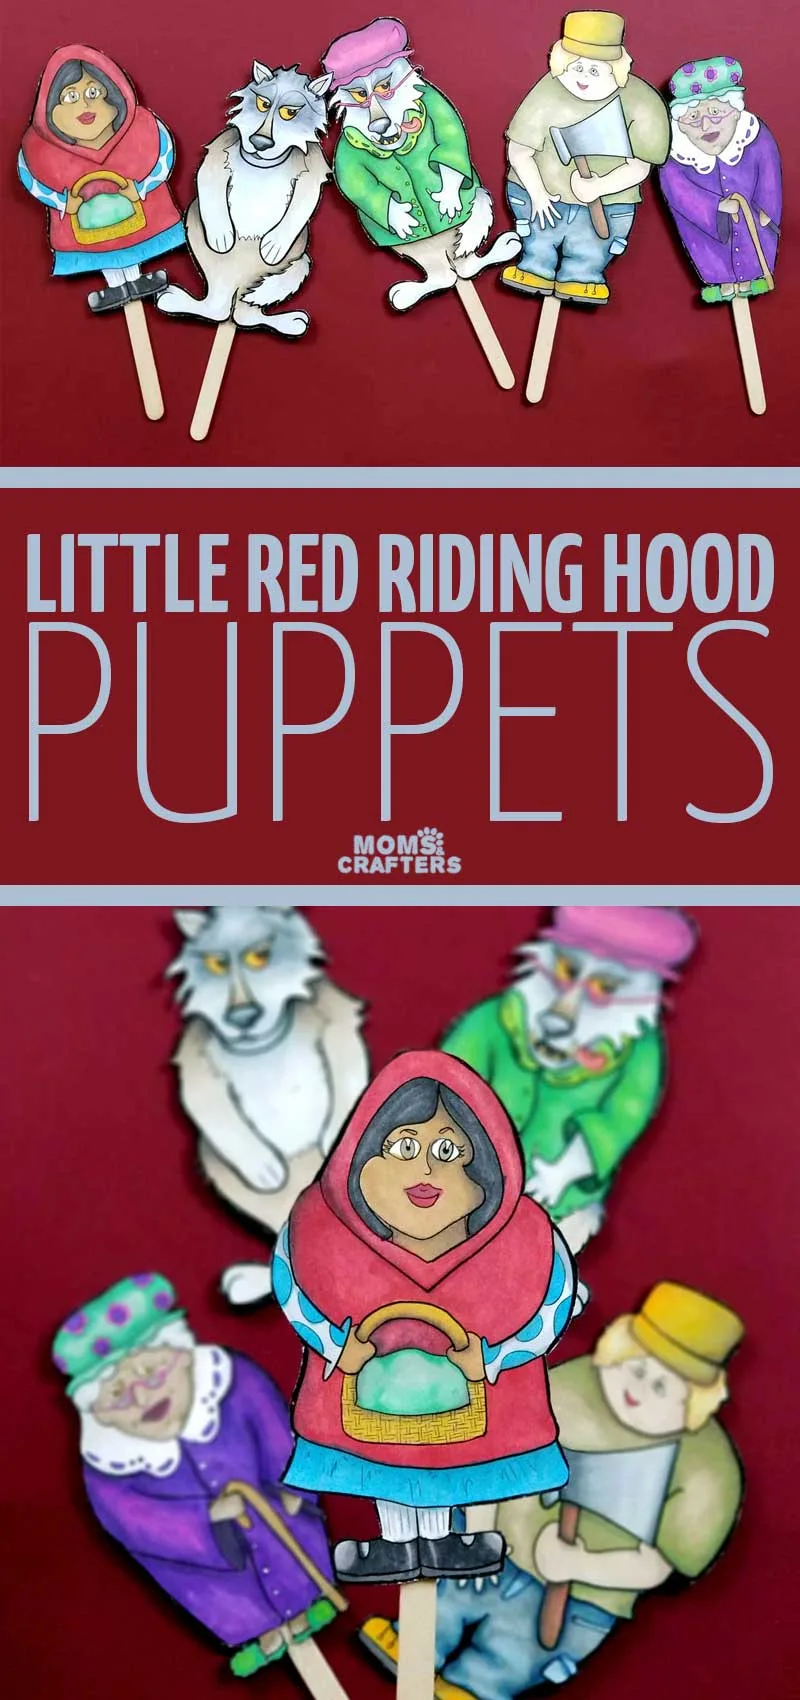 Click to download beautiful Little Red Riding Hood puppets - these paper puppets are perfect for storytelling with kids! It's a fun literacy activity and beautiful multicultural puppets for teaching kids naturally about diversity. 